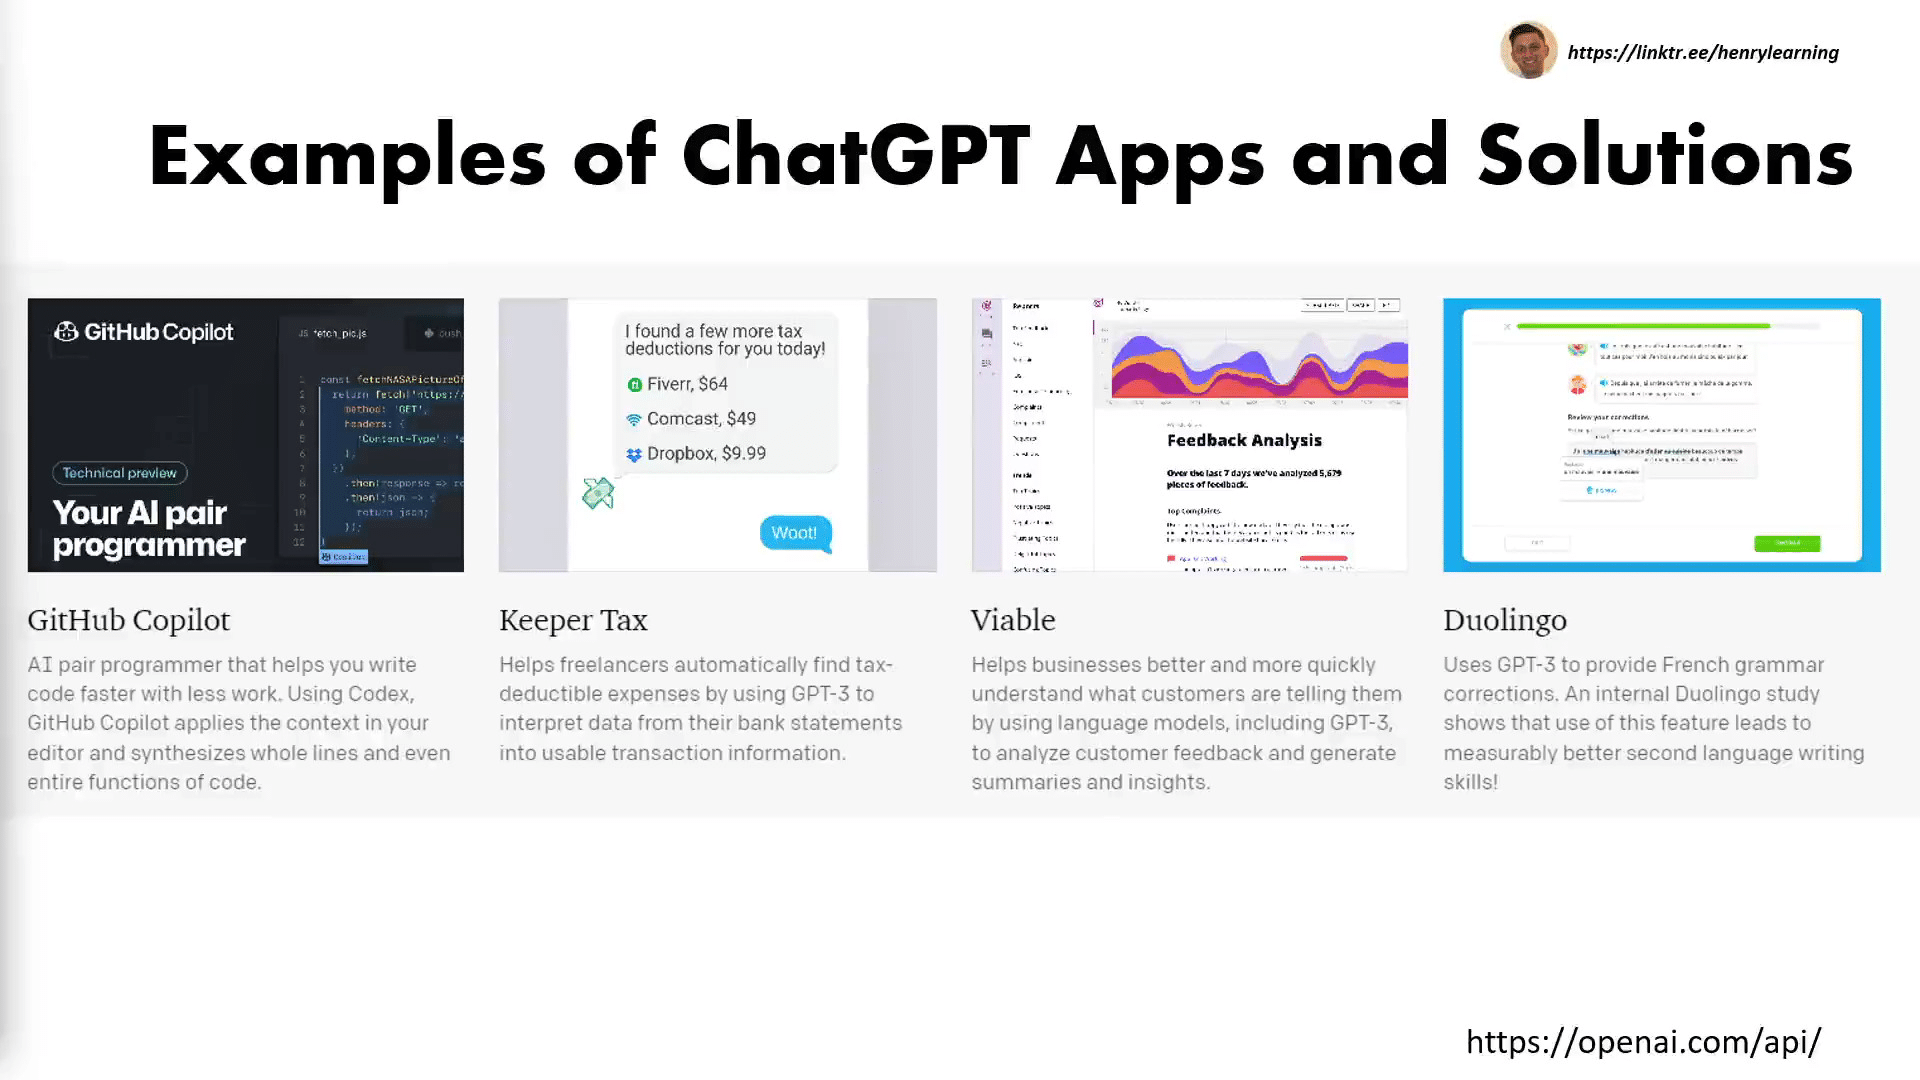 Duolingo, Viable, Keeper Tax, and GitHub Copilot are examples of services that are using the ChatGPT API